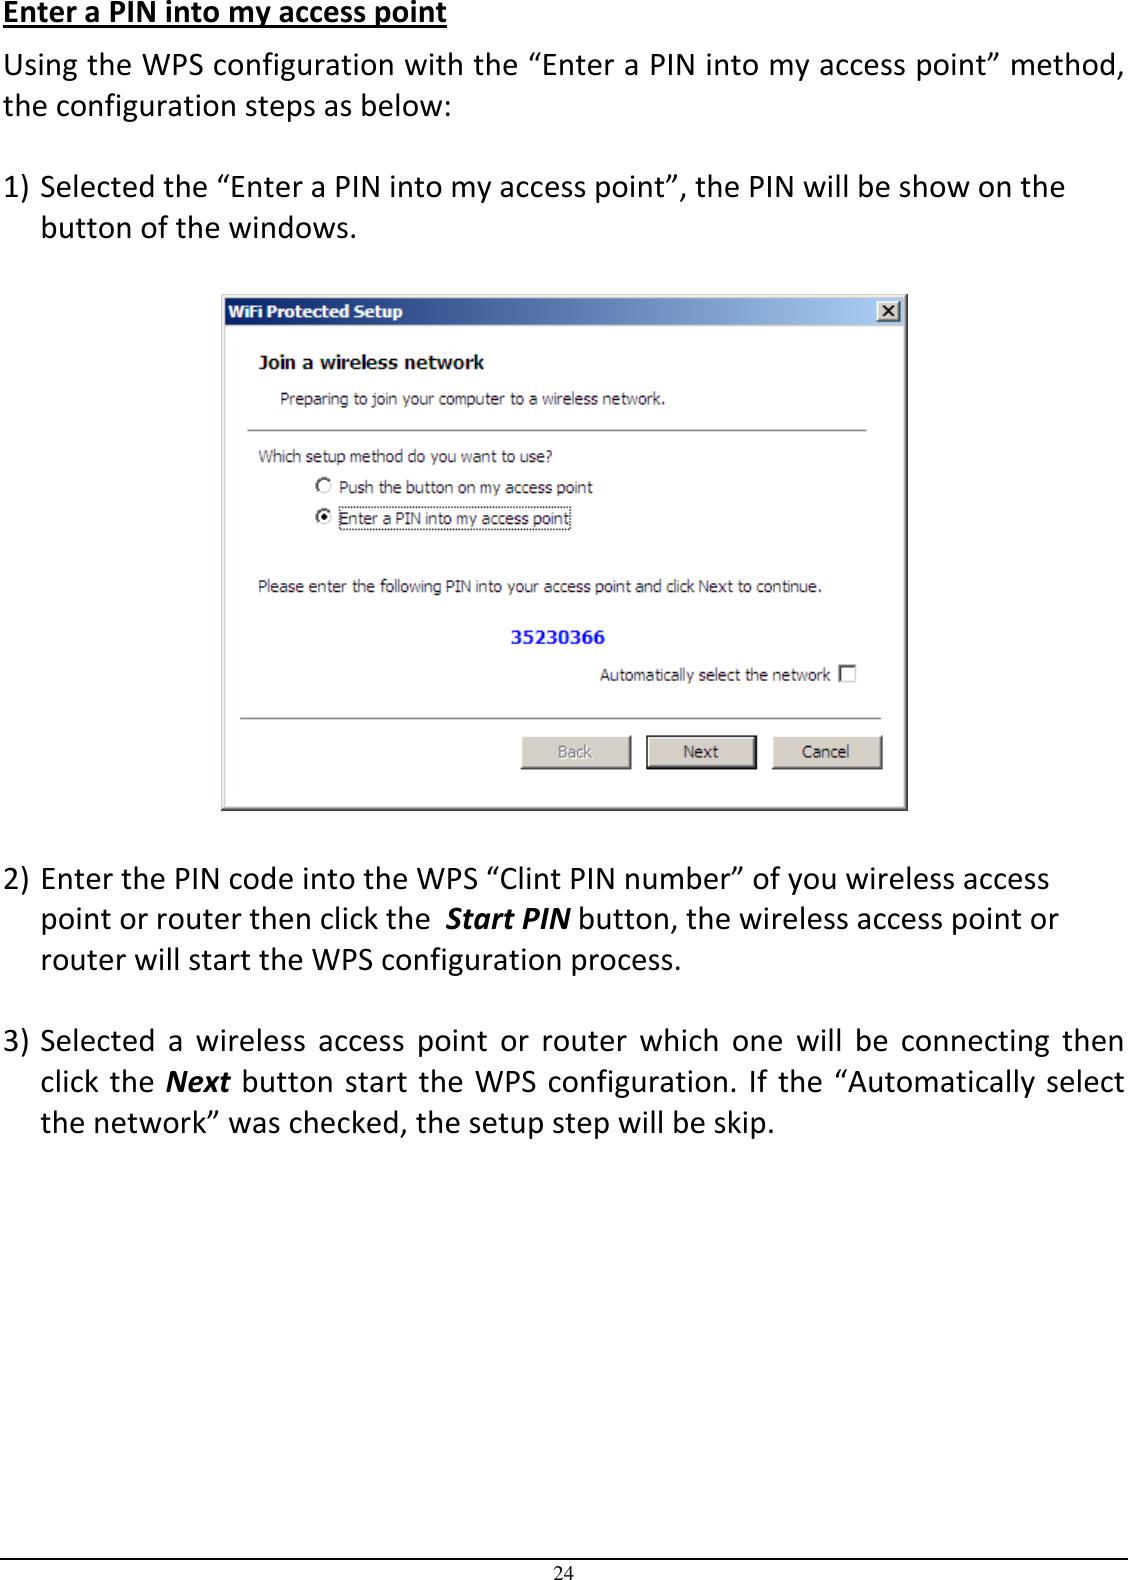  24 Enter a PIN into my access point Using the WPS configuration with the “Enter a PIN into my access point” method, the configuration steps as below:  1) Selected the “Enter a PIN into my access point”, the PIN will be show on the button of the windows.    2) Enter the PIN code into the WPS “Clint PIN number” of you wireless access point or router then click the  Start PIN button, the wireless access point or router will start the WPS configuration process.  3) Selected  a  wireless  access  point  or  router  which  one  will  be  connecting  then click the Next button start the WPS configuration. If the “Automatically select the network” was checked, the setup step will be skip. 